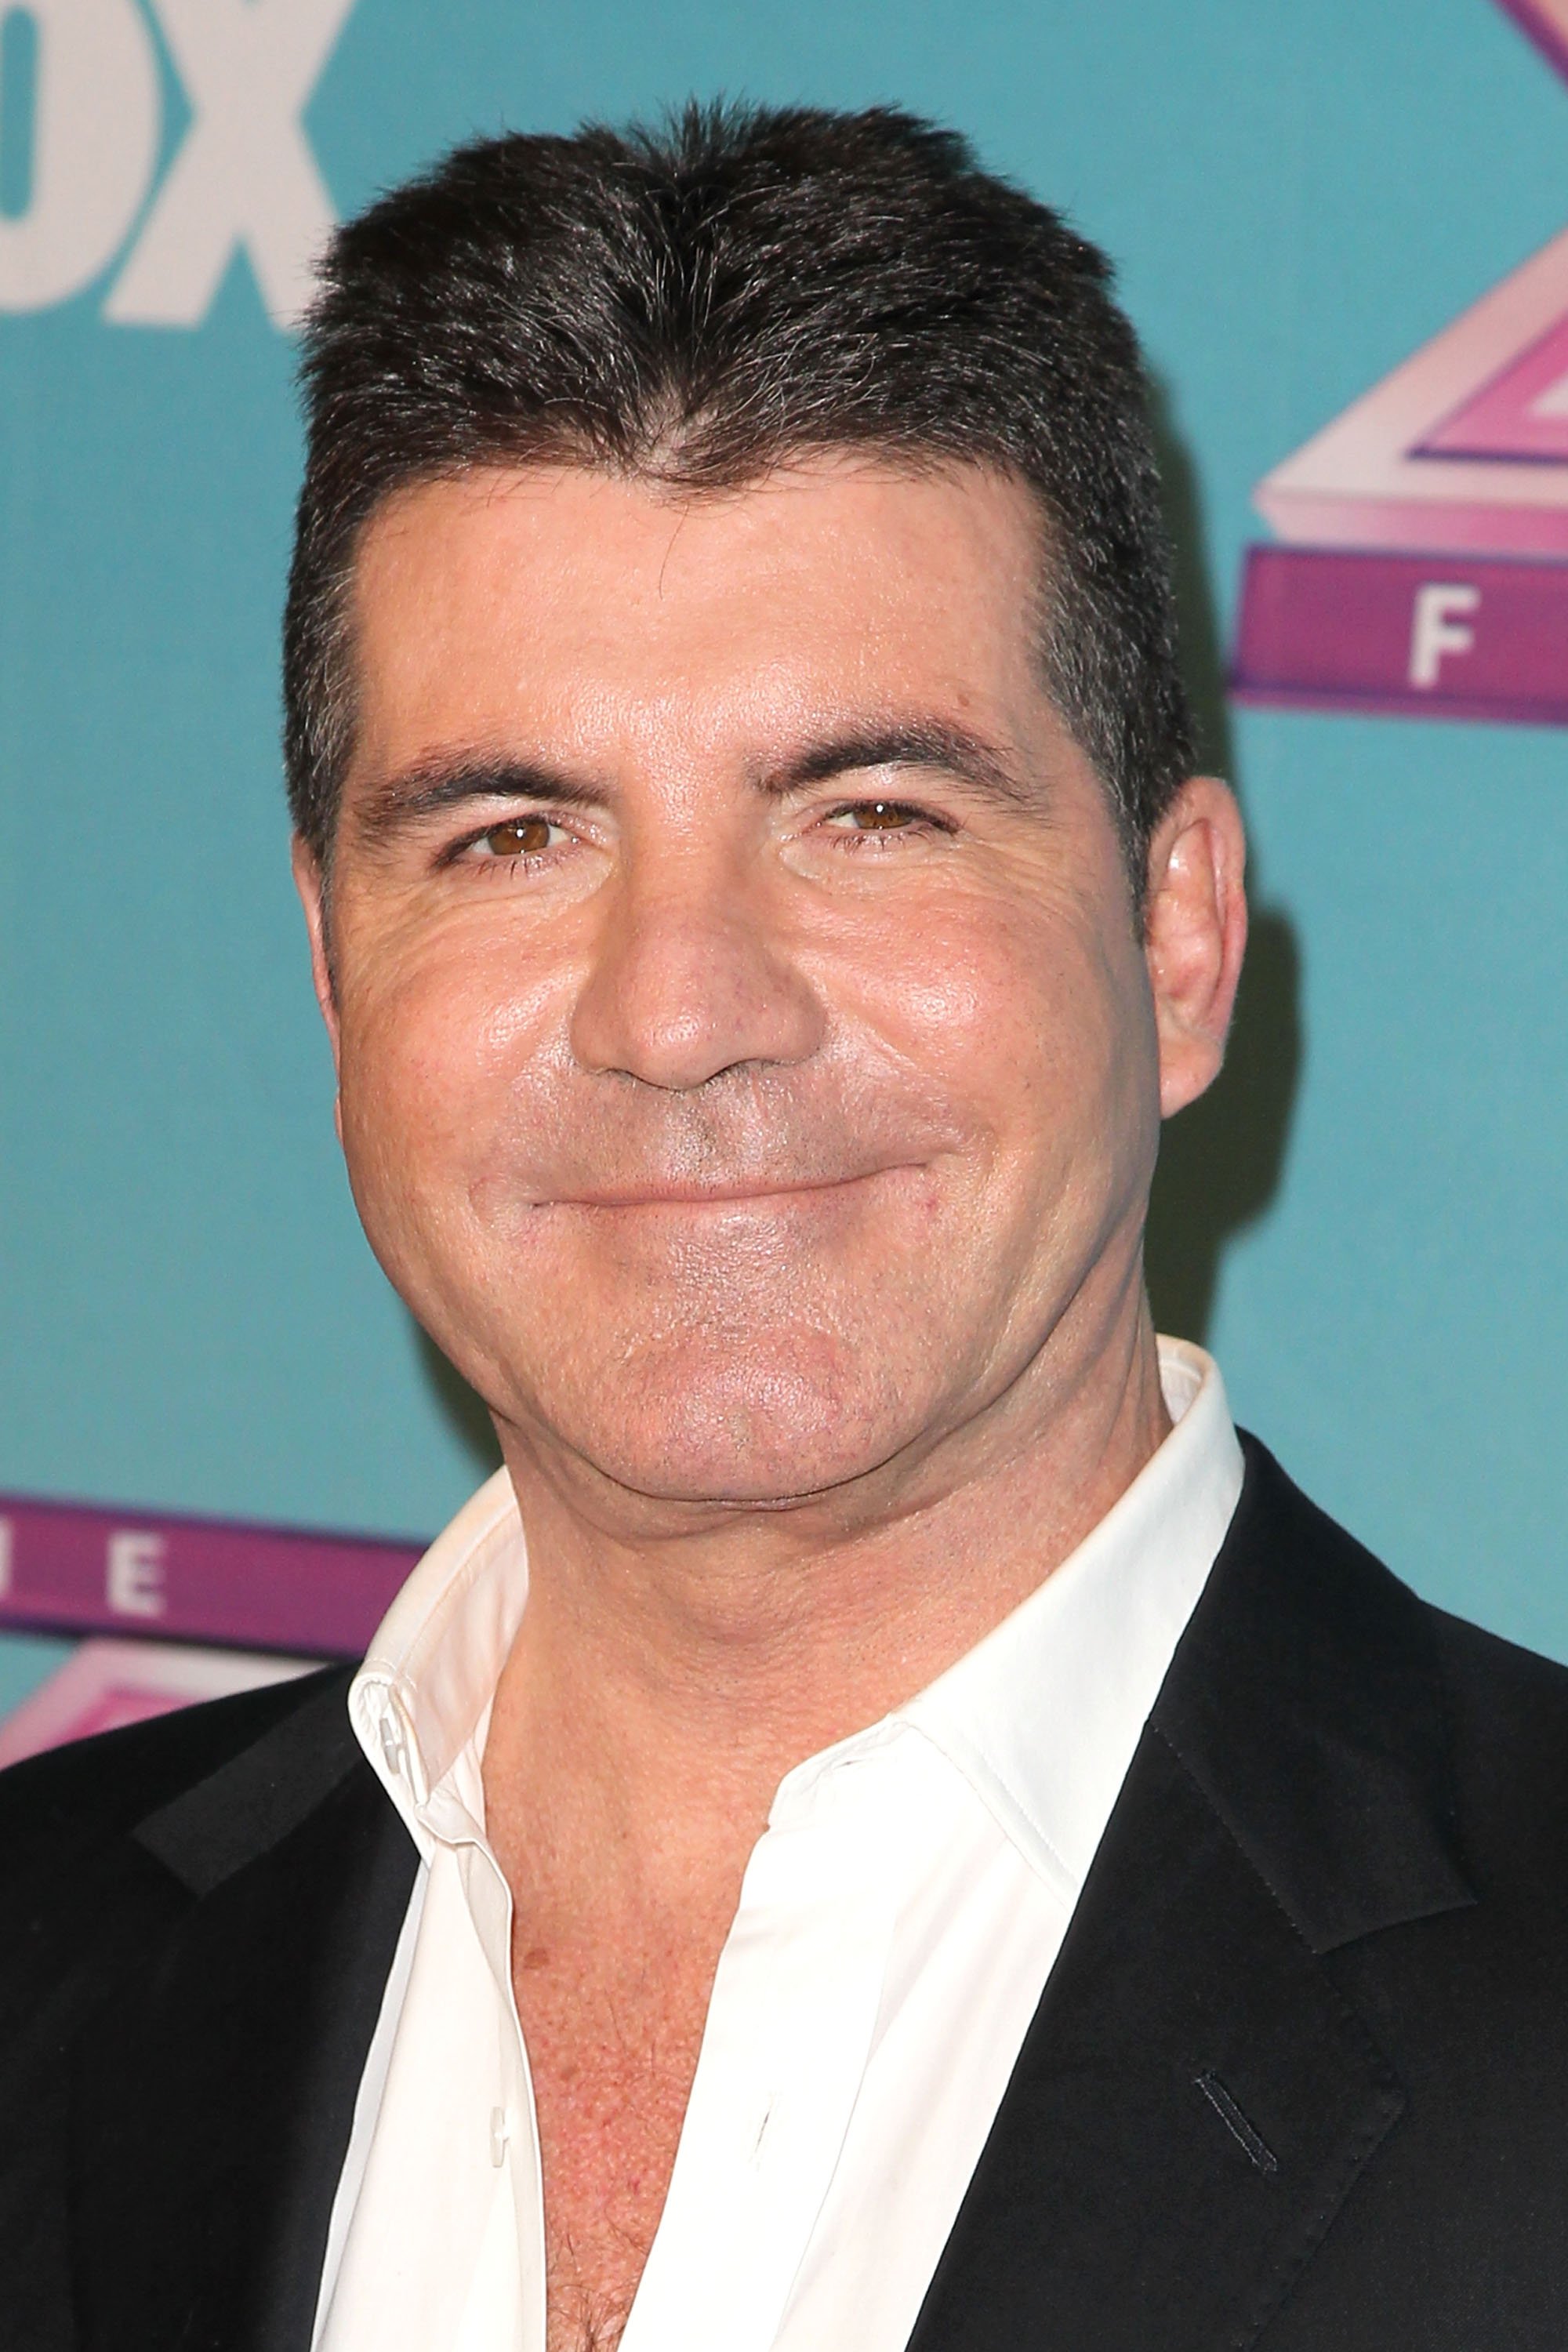 Simon Cowell attends Fox's "The X Factor" Season Finale at CBS Television City on December 20, 2012, in Los Angeles, California. | Source: Getty Images